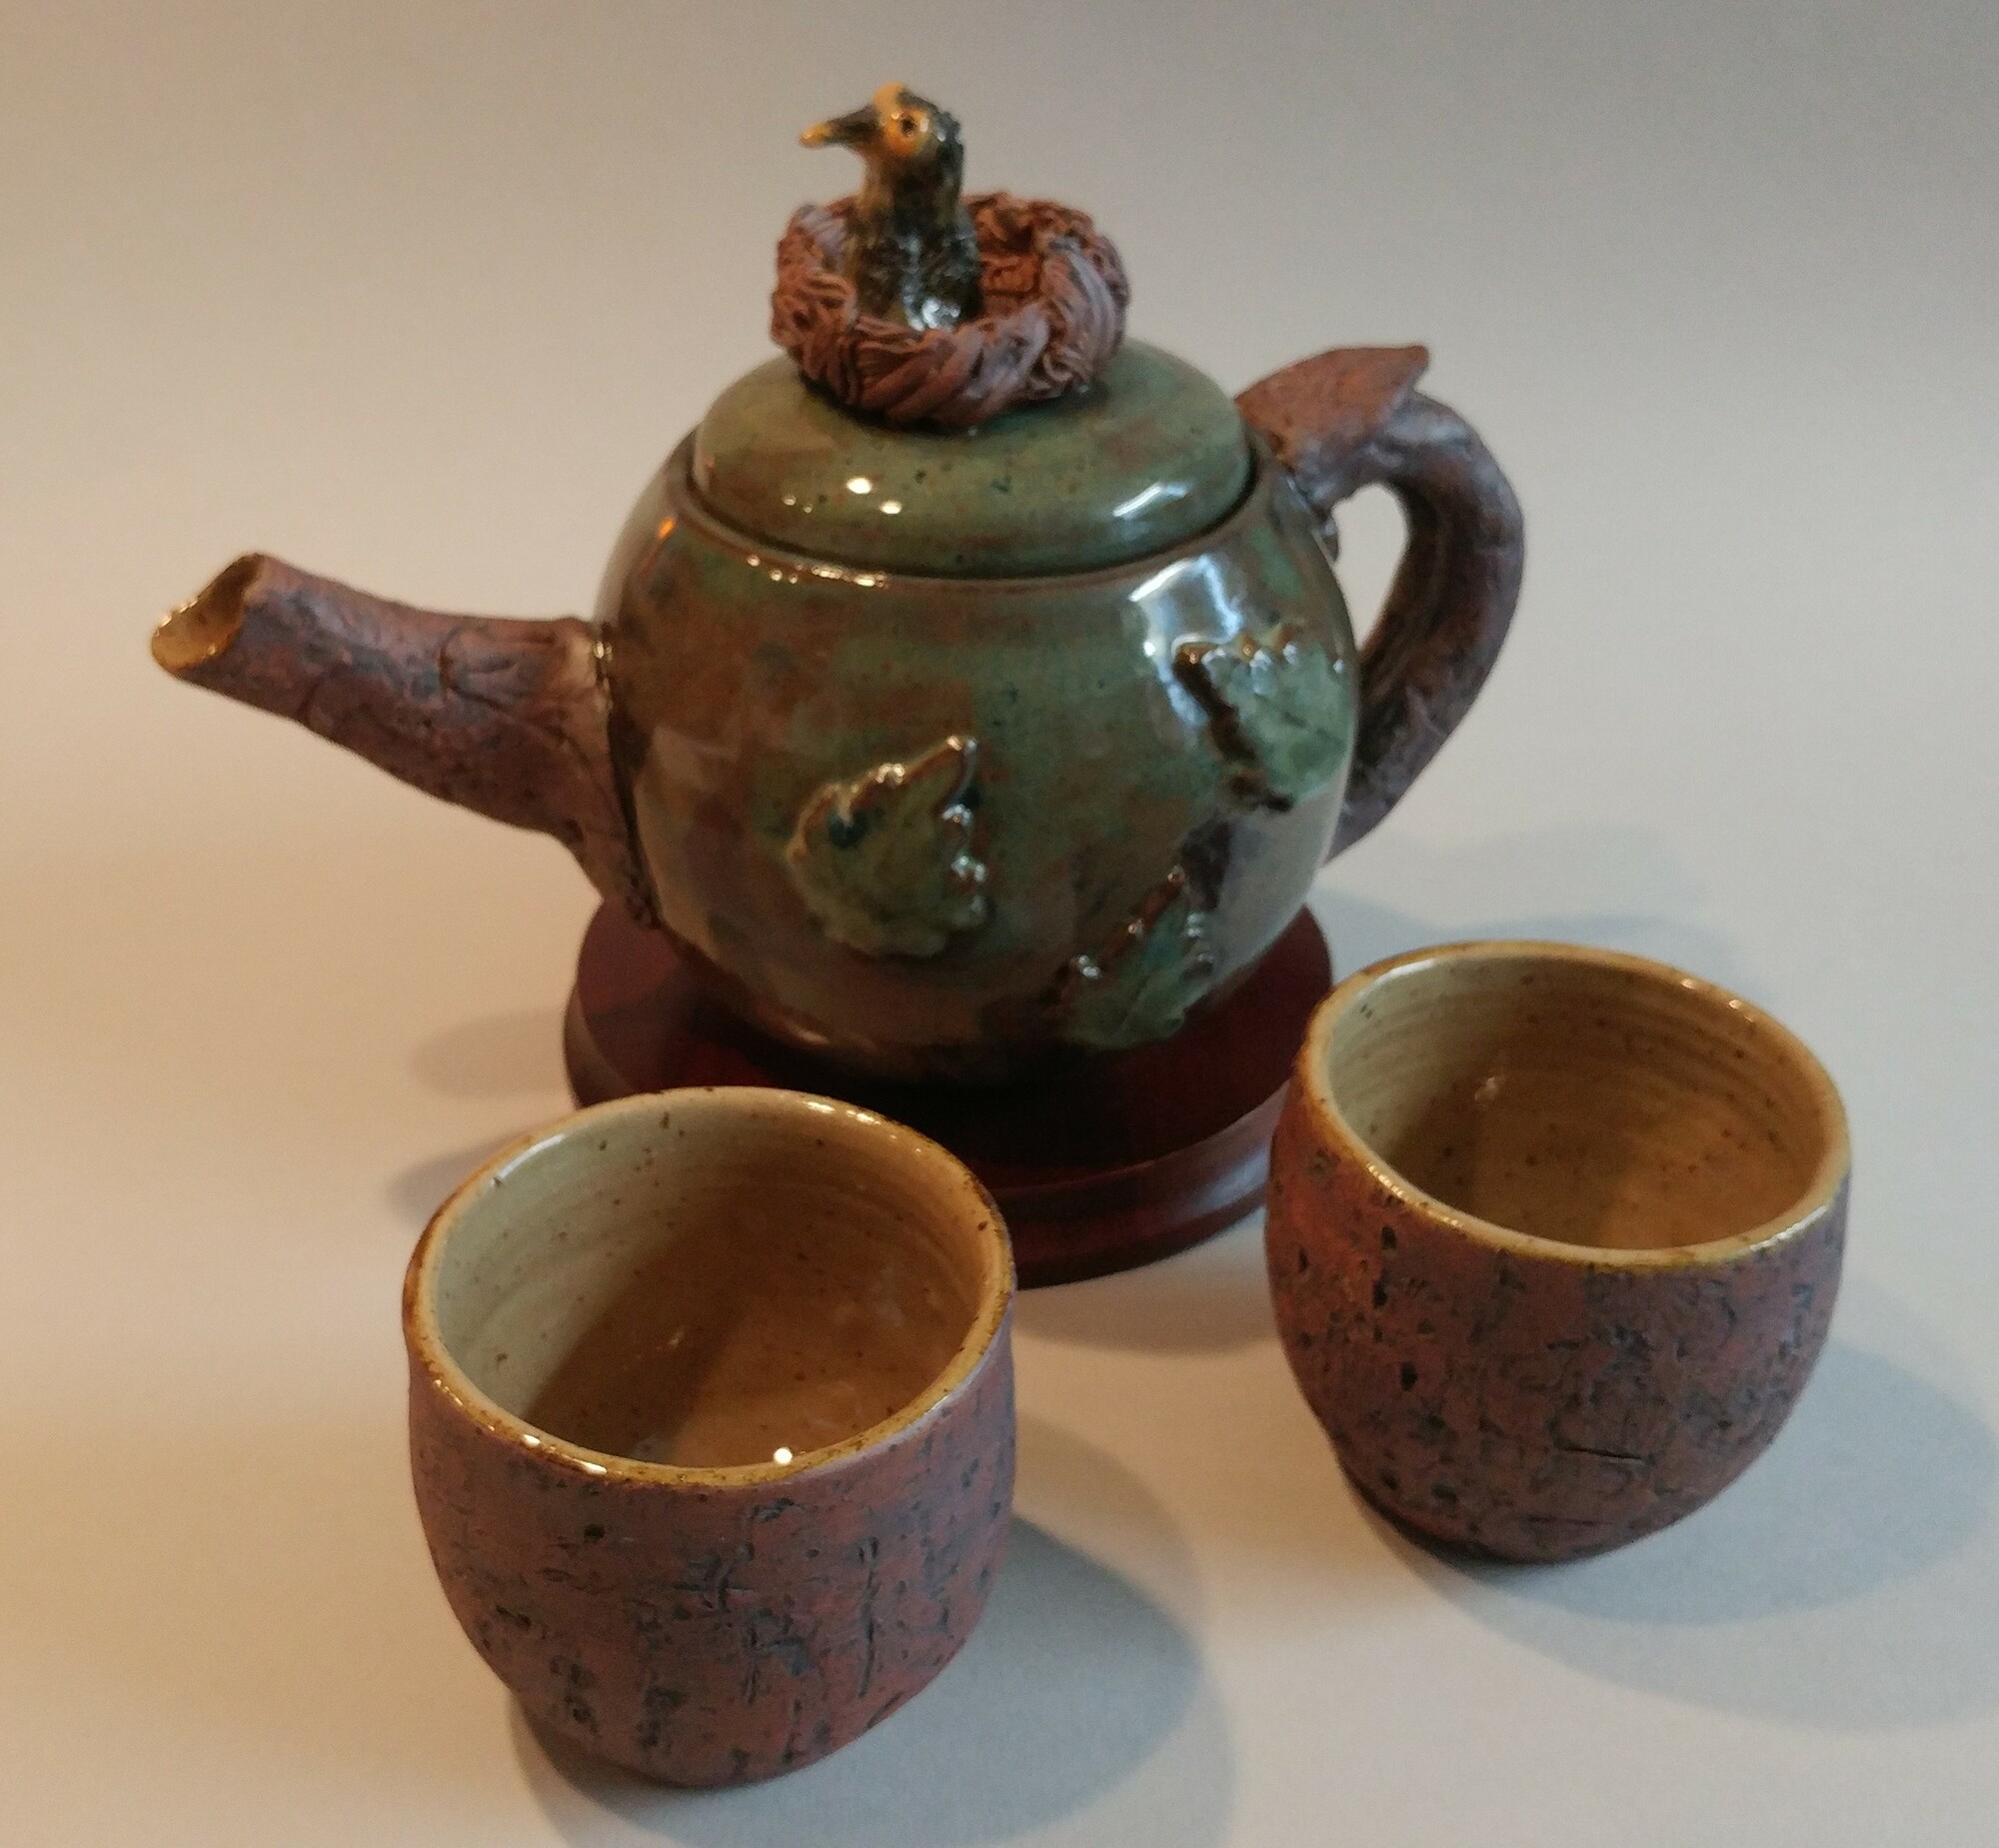 Birdnest Teapot Set
Artist:  Pam Gray
Medium:  Pottery
Dimensions:   teapot is 10 in. length, 6 in wide, and 7 in tall; cups are  3-1/2 in x 3 in.
Description:  Stoneware 12 cup  teapot with baby bird in nest on lid with 2 matching cups.  Mugs hold 5 oz.   The teapot's handle and spout and the cups are textured with wood pattern.